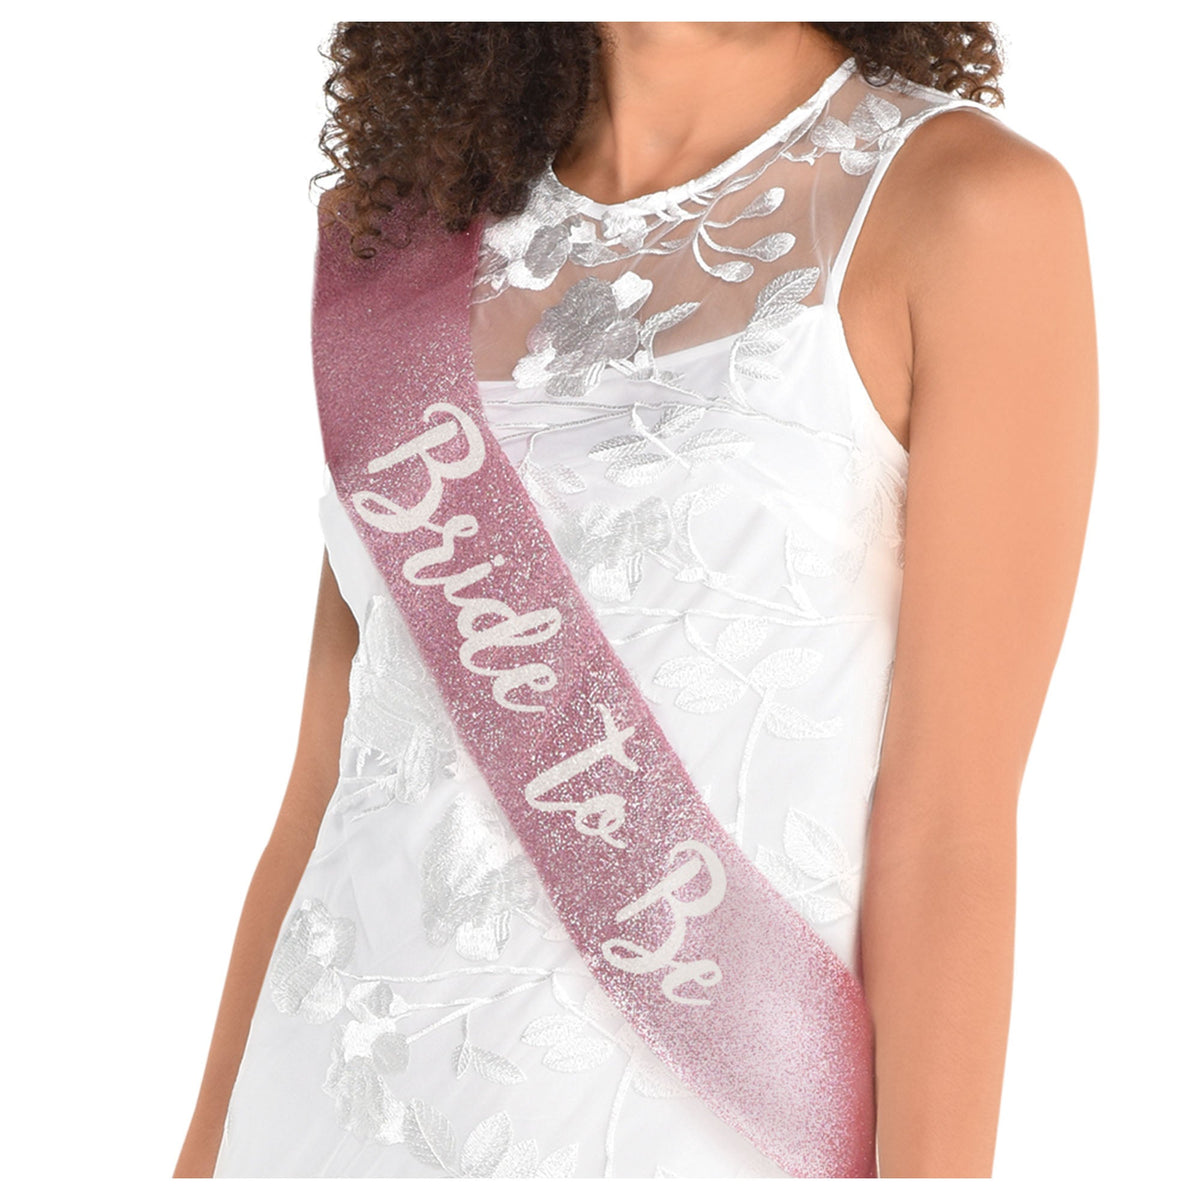 Bride To Be 30" Deluxe Sash